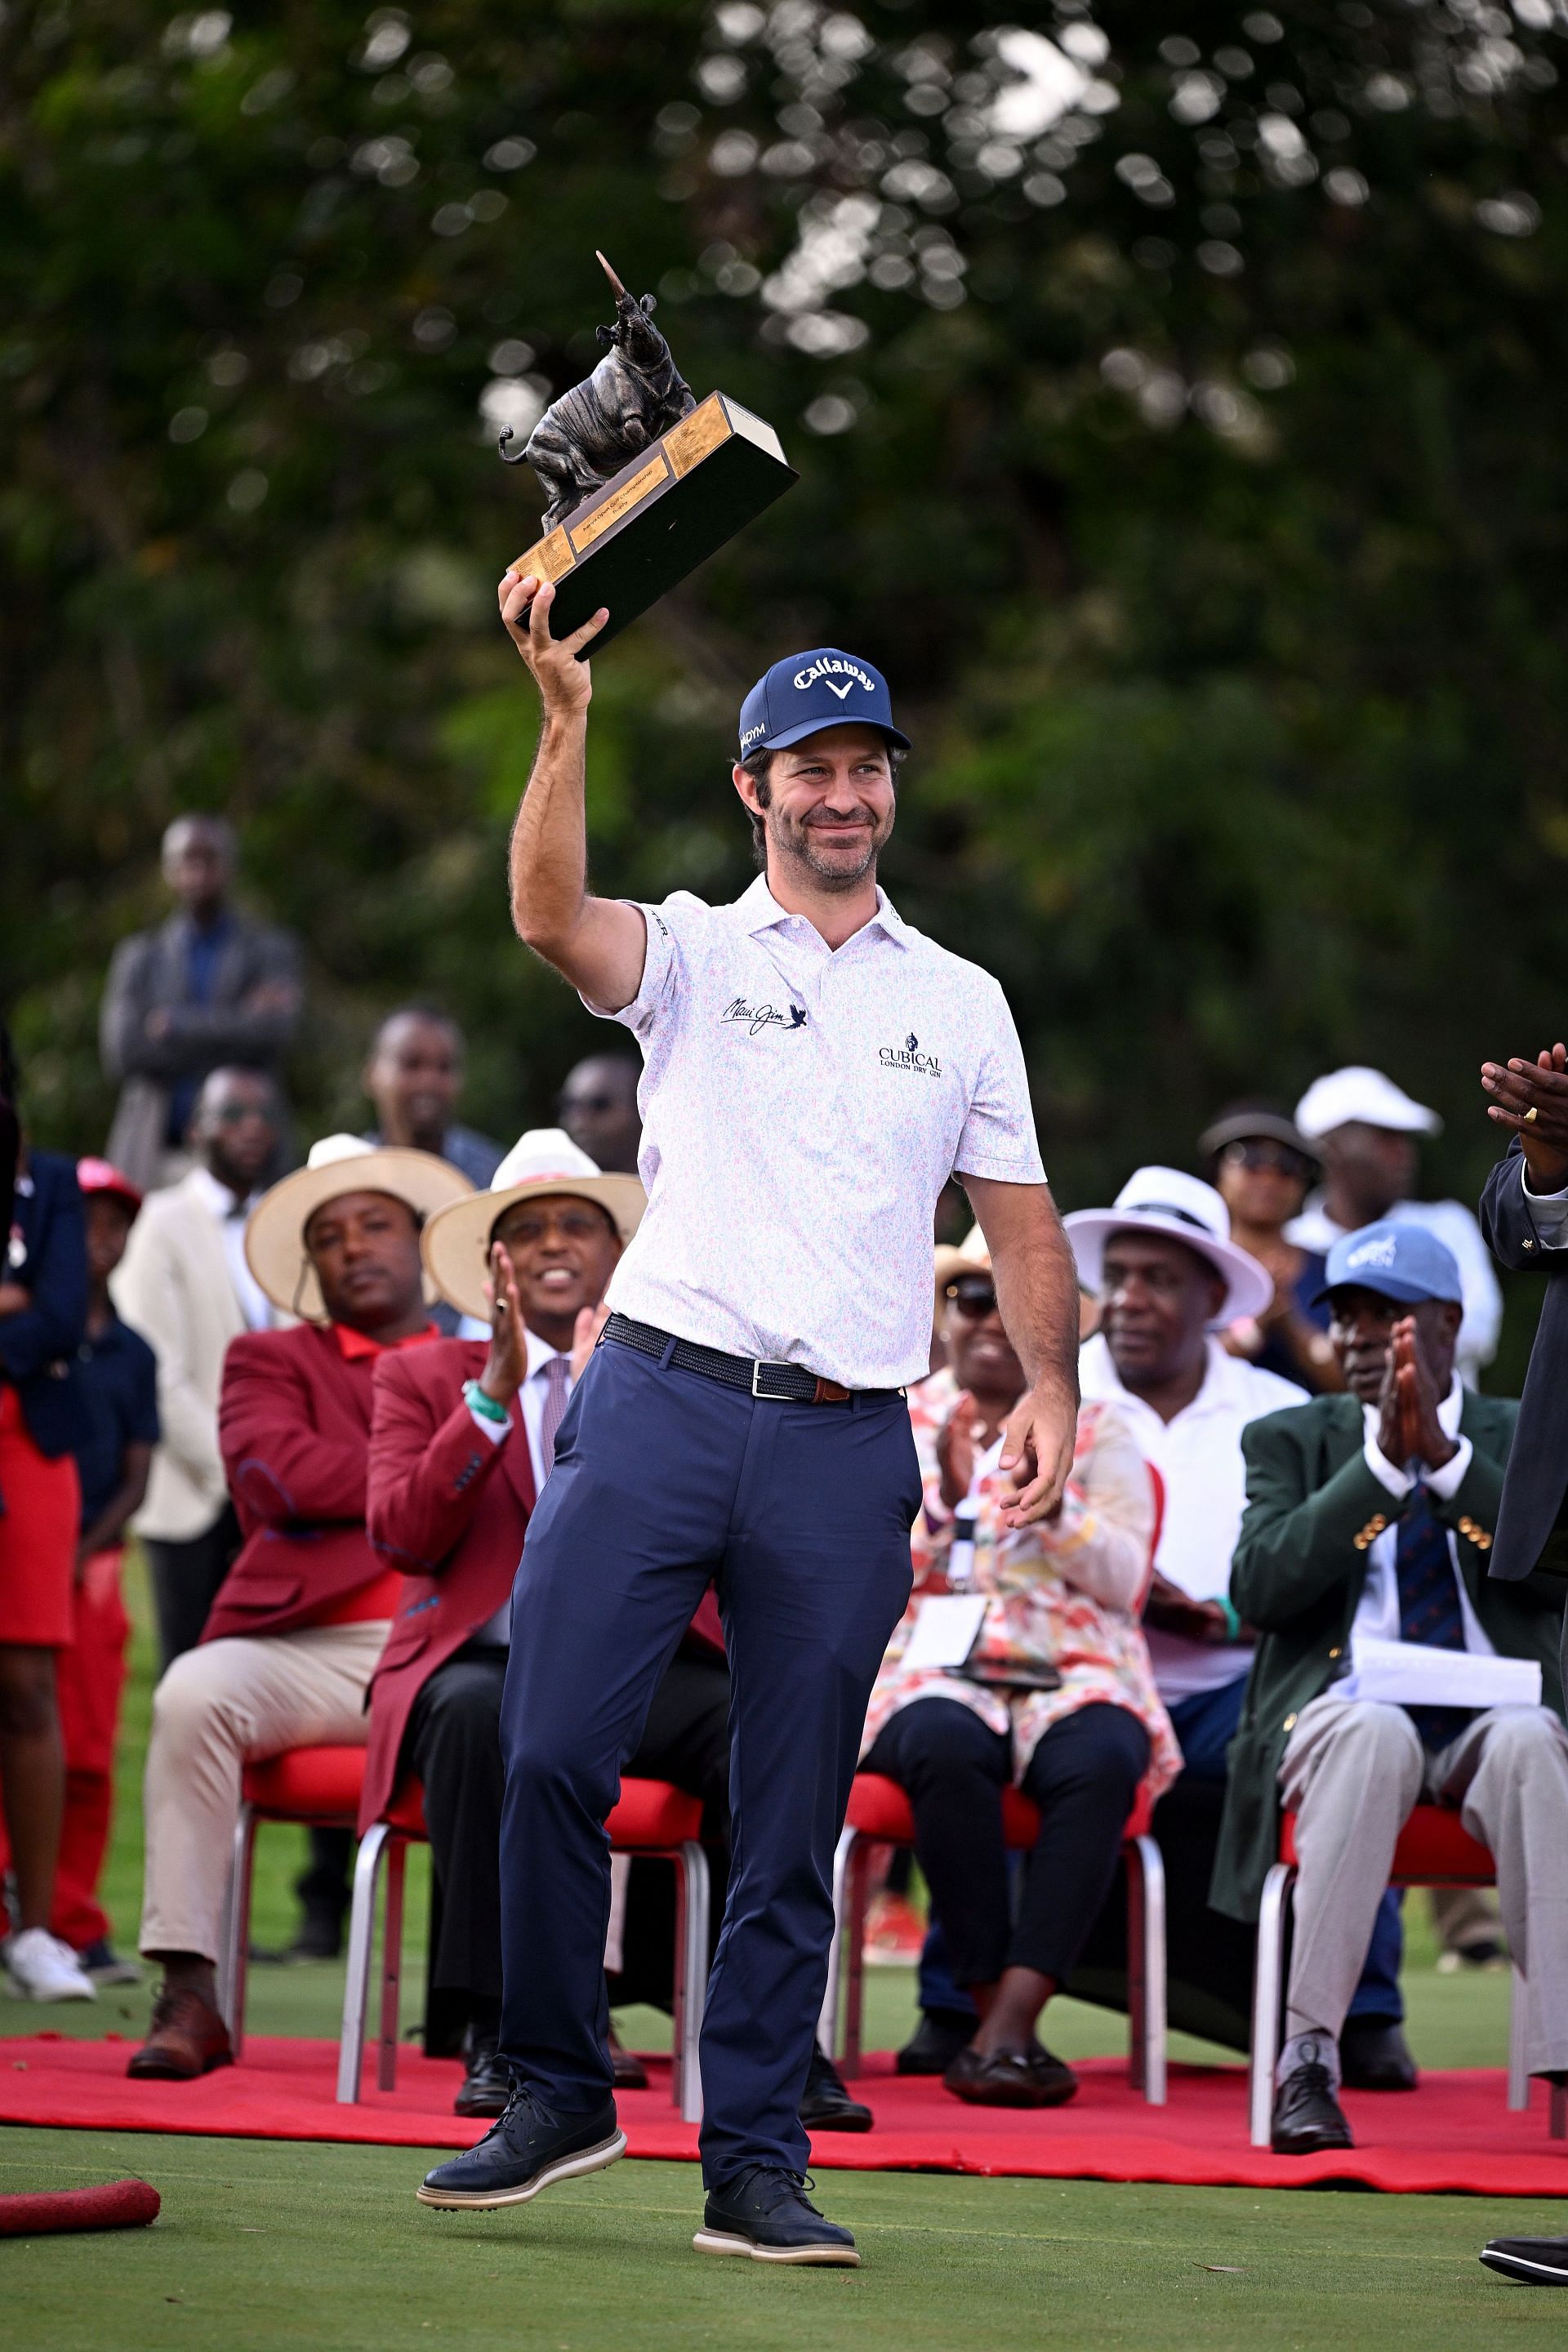 Magical Kenya Open Presented by Absa - Day Four